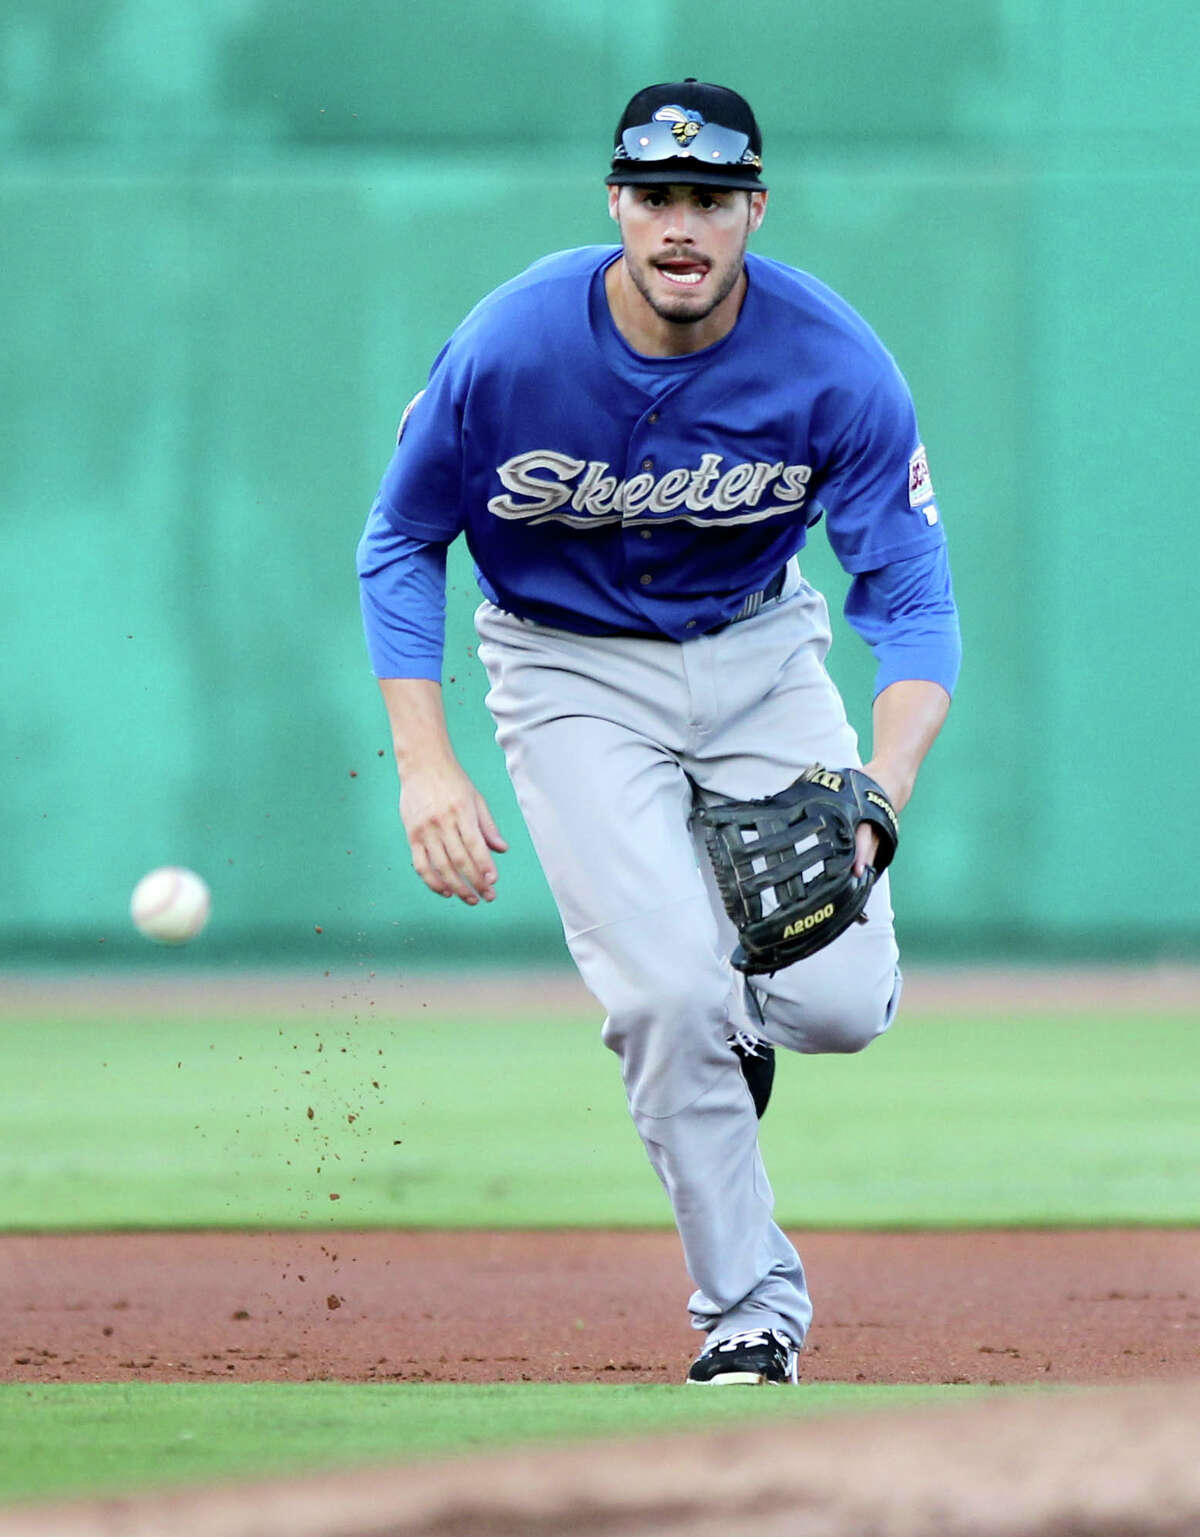 Patrick Palmeiro will play third base in his first season with the Skeeters.